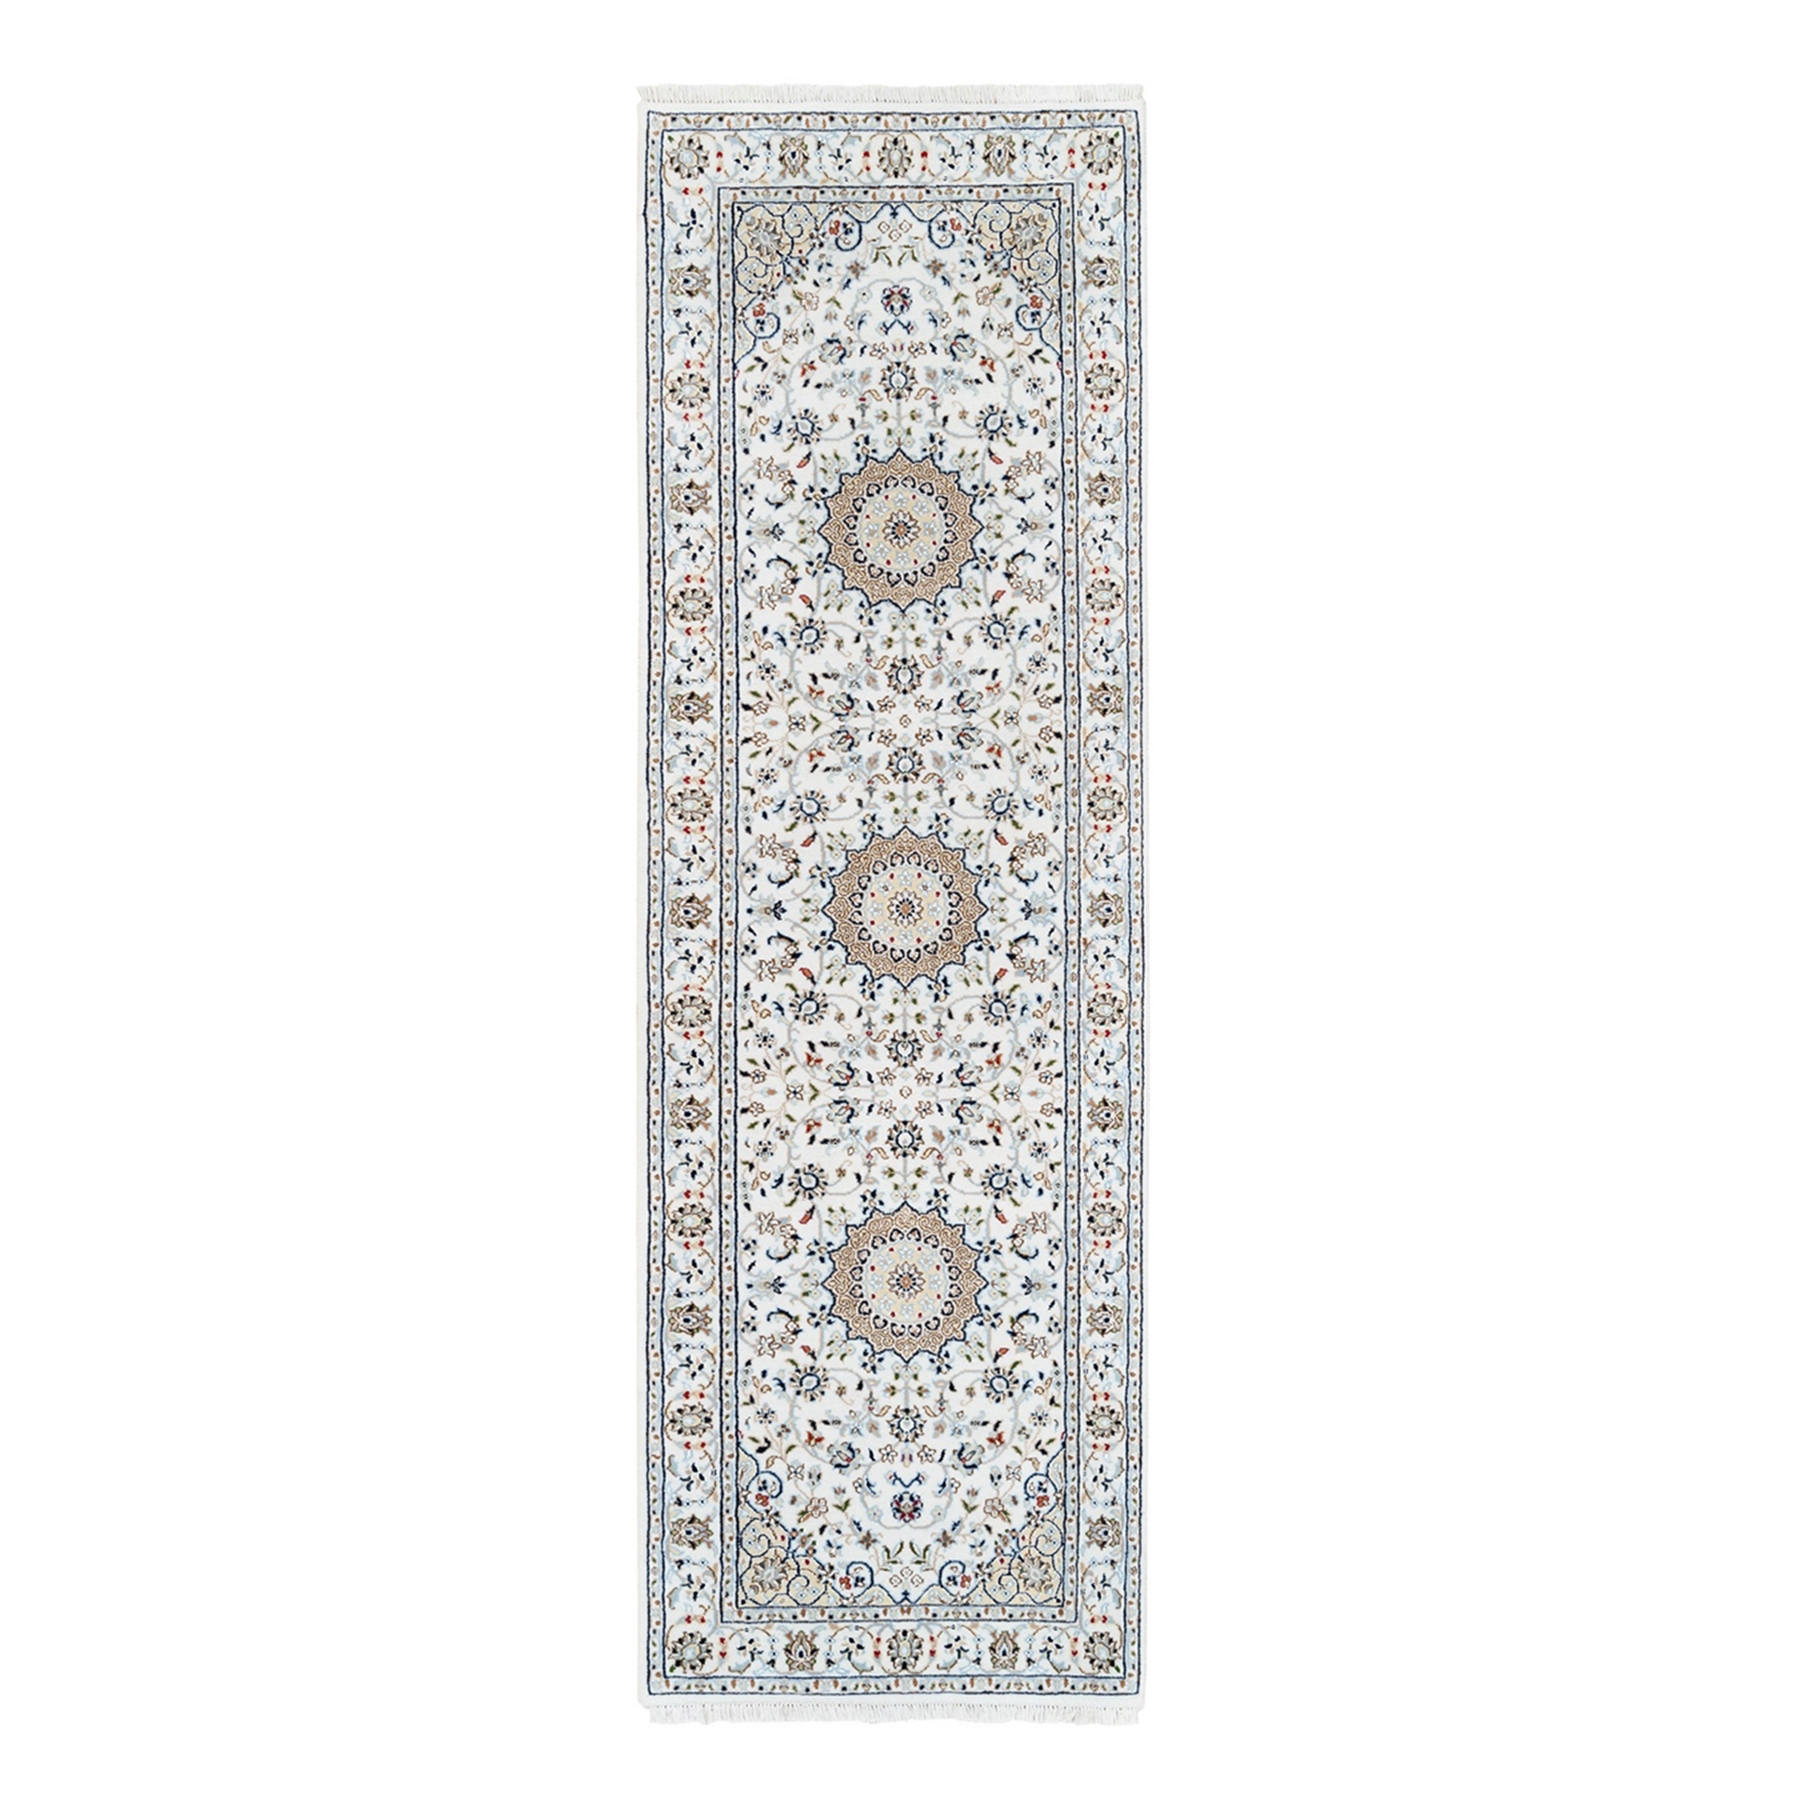 Pirniakan Collection Hand Knotted Ivory Rug No: 1125410